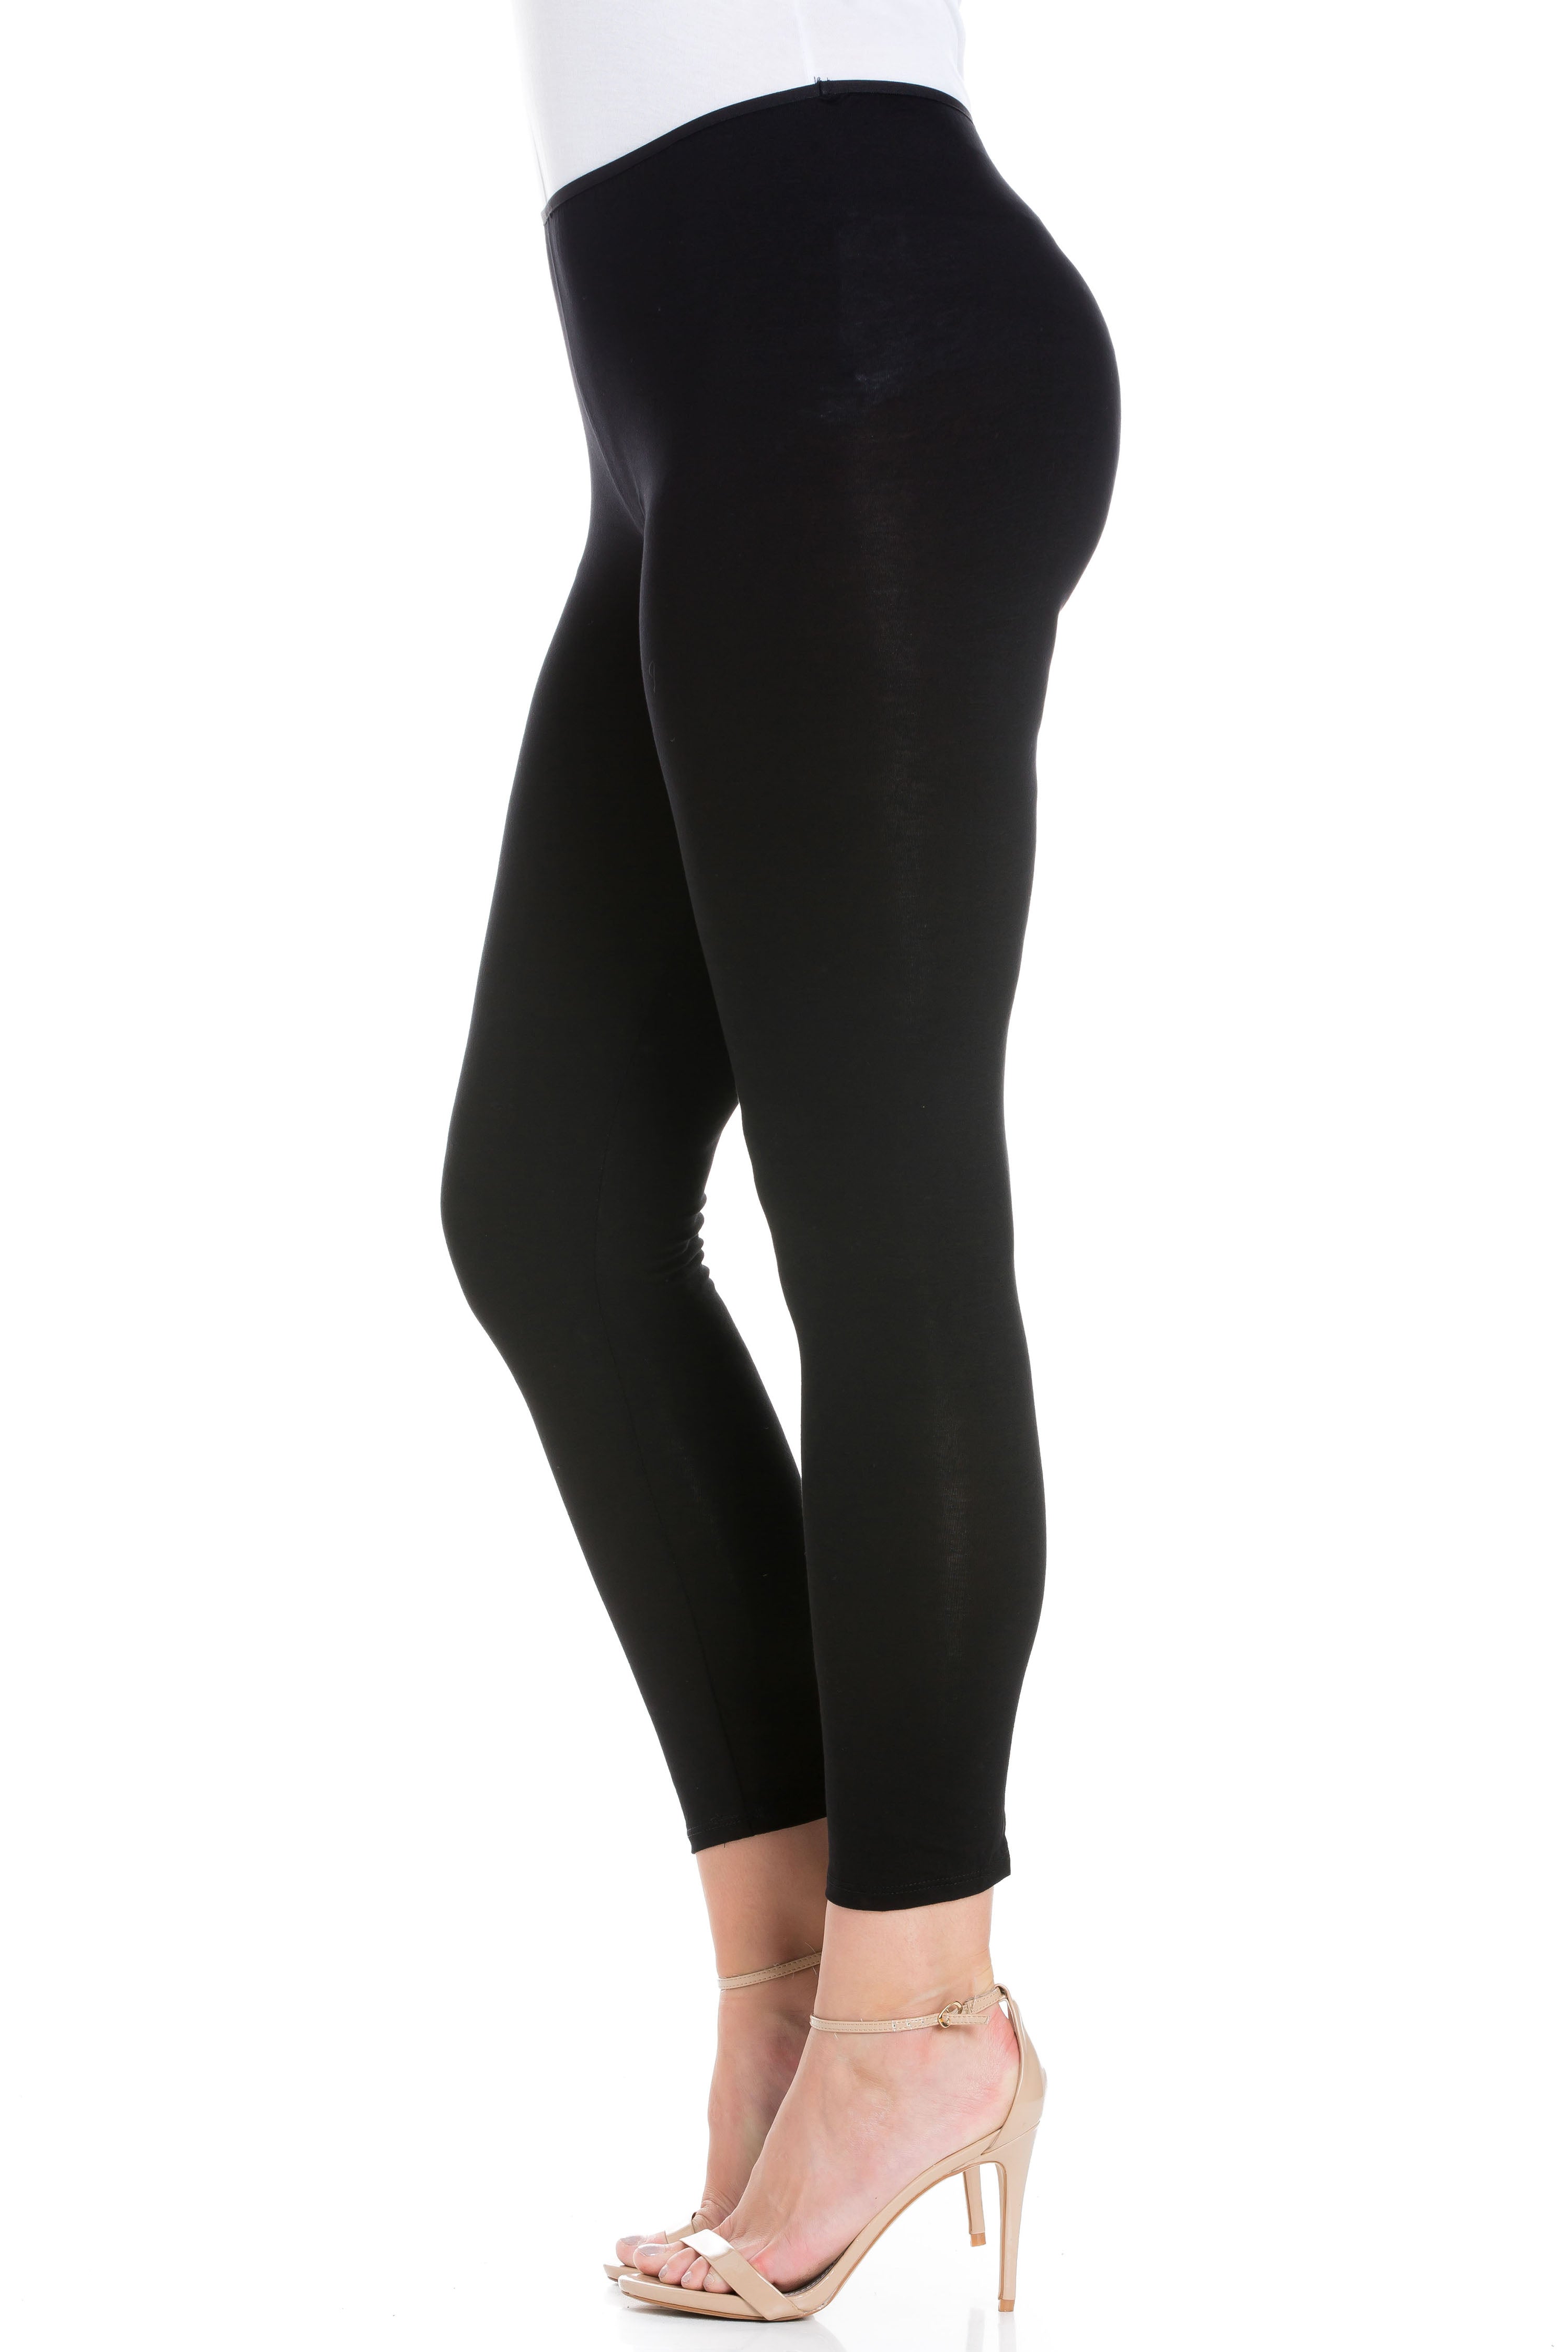 Buy Dollar Missy Women's Combo Of 3 Cotton Slim Fit M Brown;White And Black Ankle  Length Leggings Online at Low Prices in India - Paytmmall.com